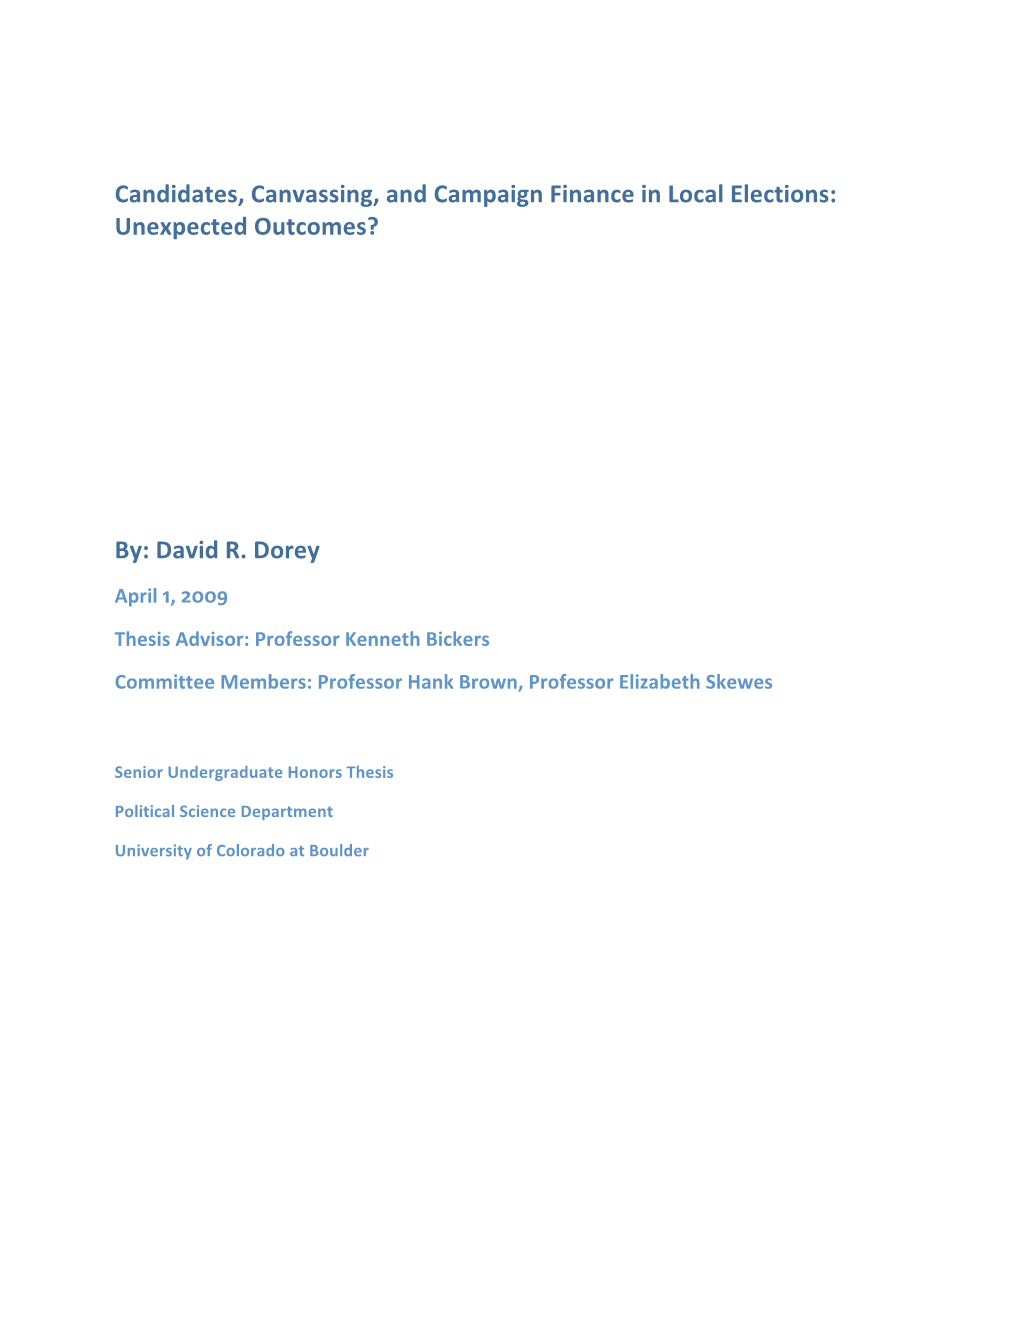 Candidates, Canvassing, and Campaign Finance in Local Elections: Unexpected Outcomes?